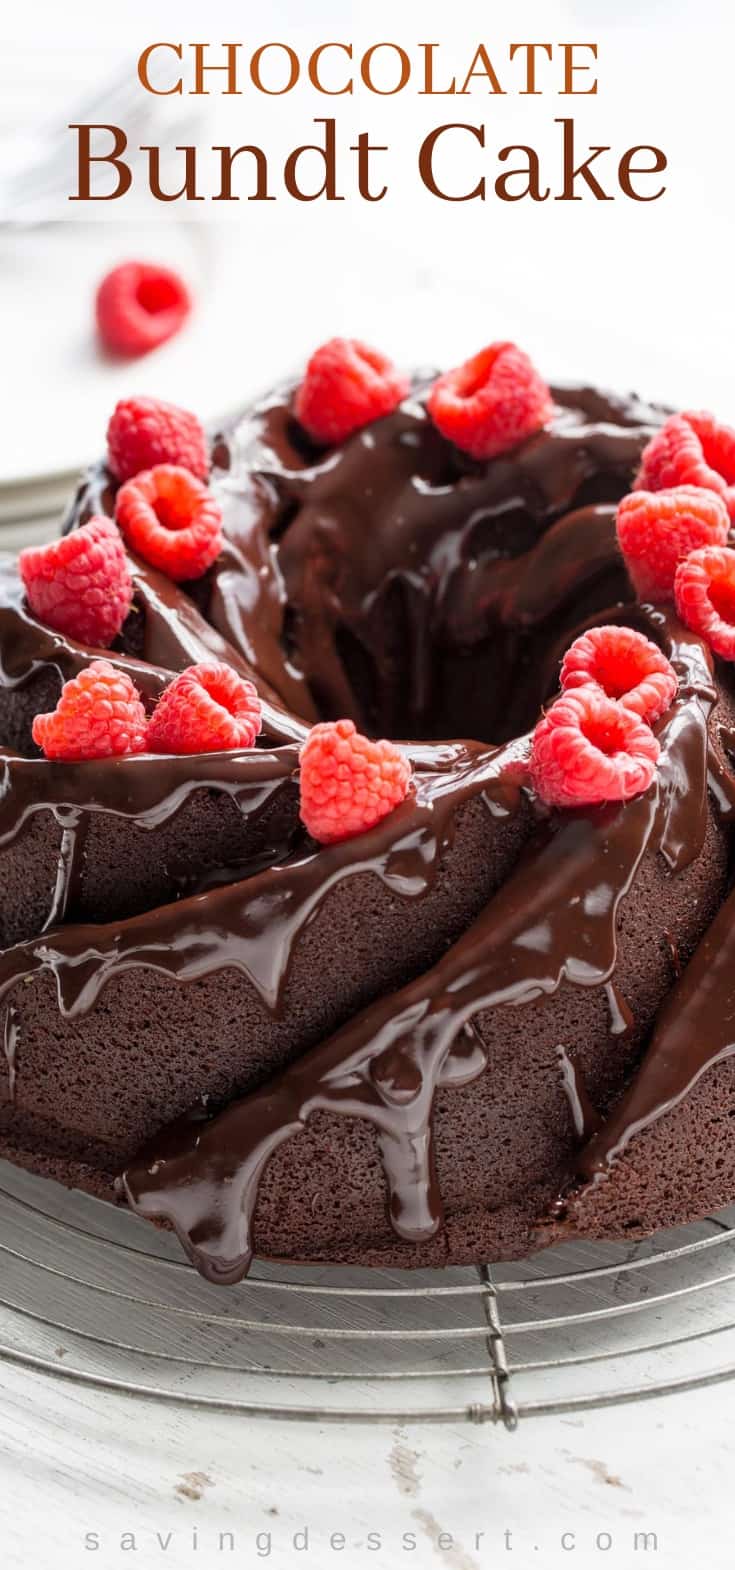 Side view of a chocolate bundt cake drizzled with chocolate icing and topped with fresh raspberries